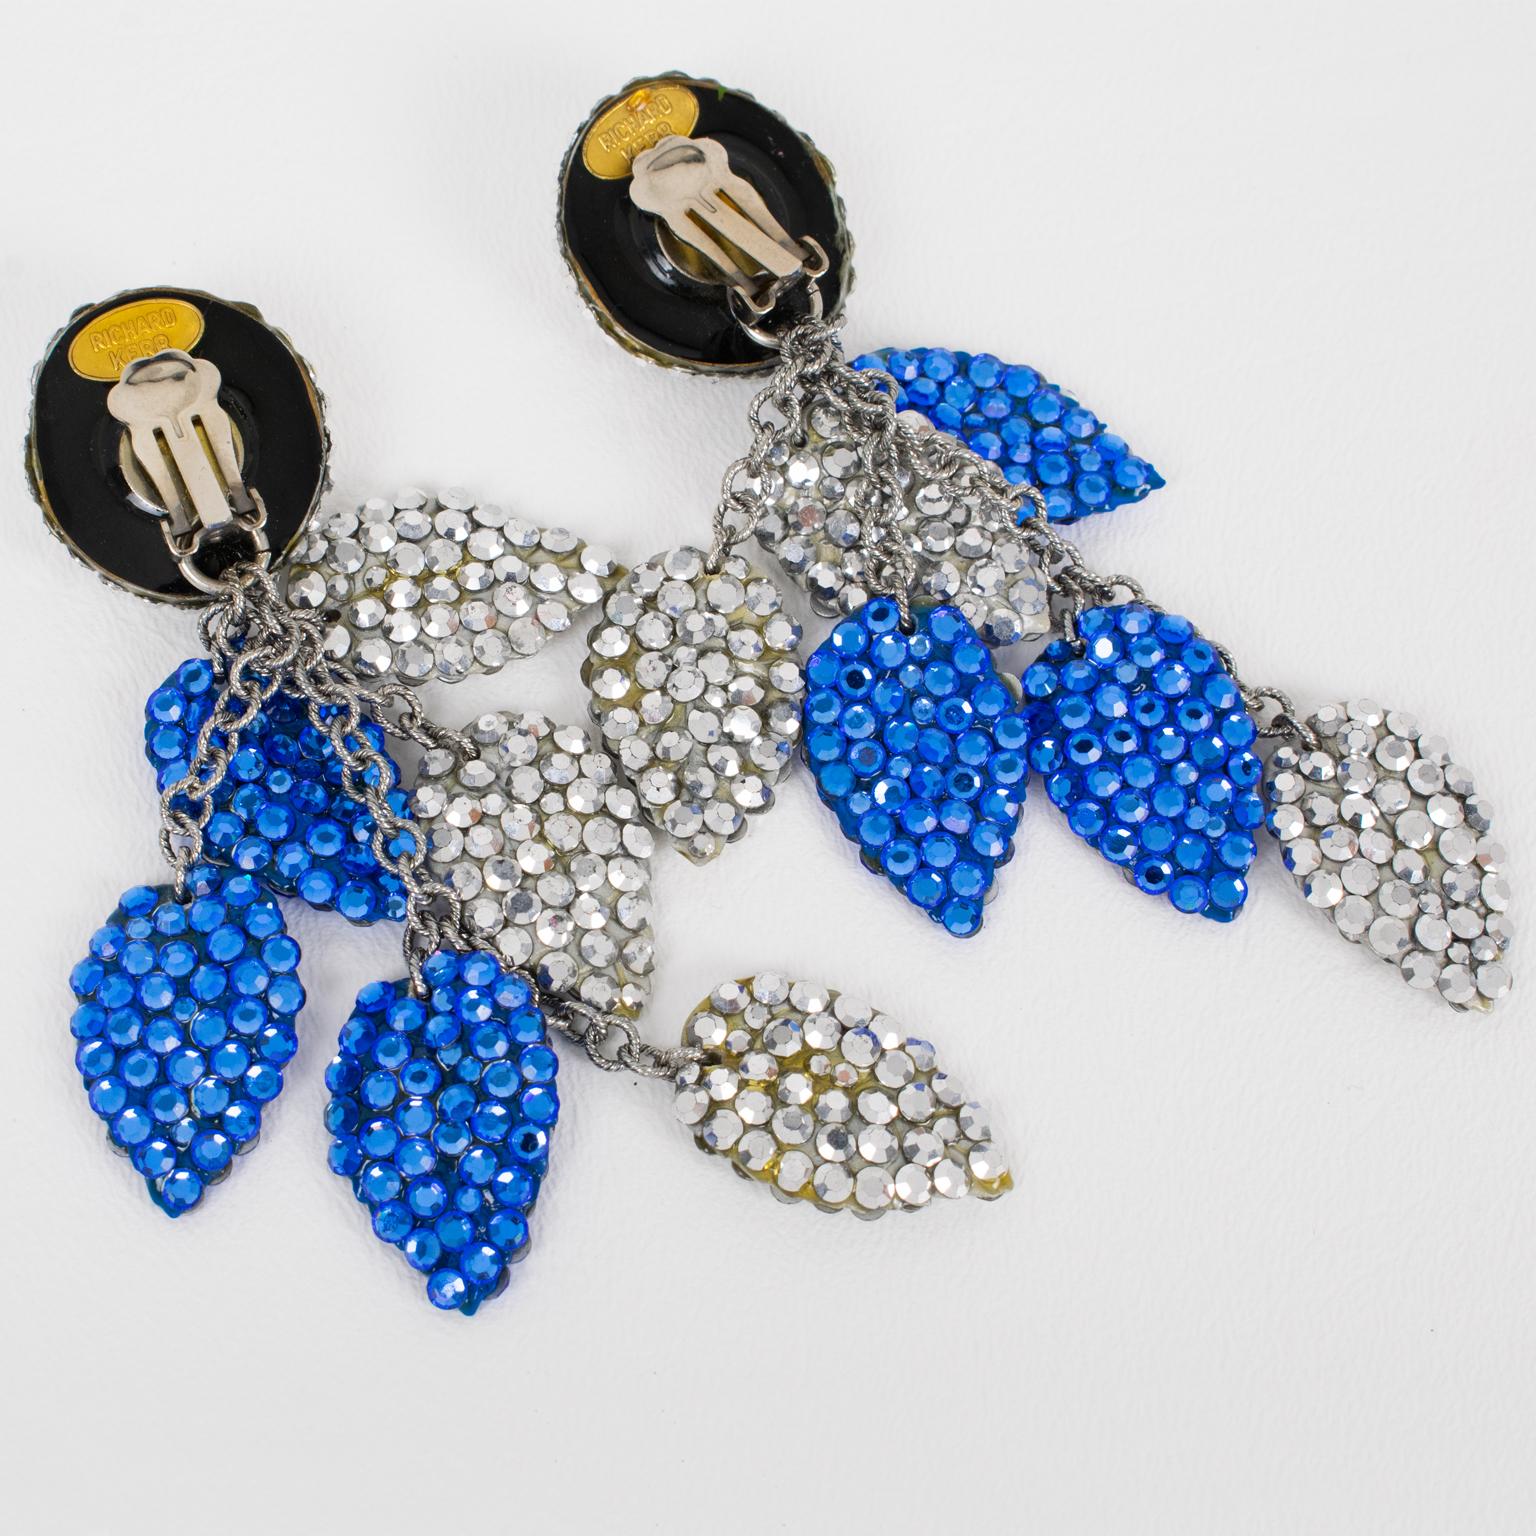 Romantic Richard Kerr Blue and Silver Jeweled Dangle Leaves Clip Earrings